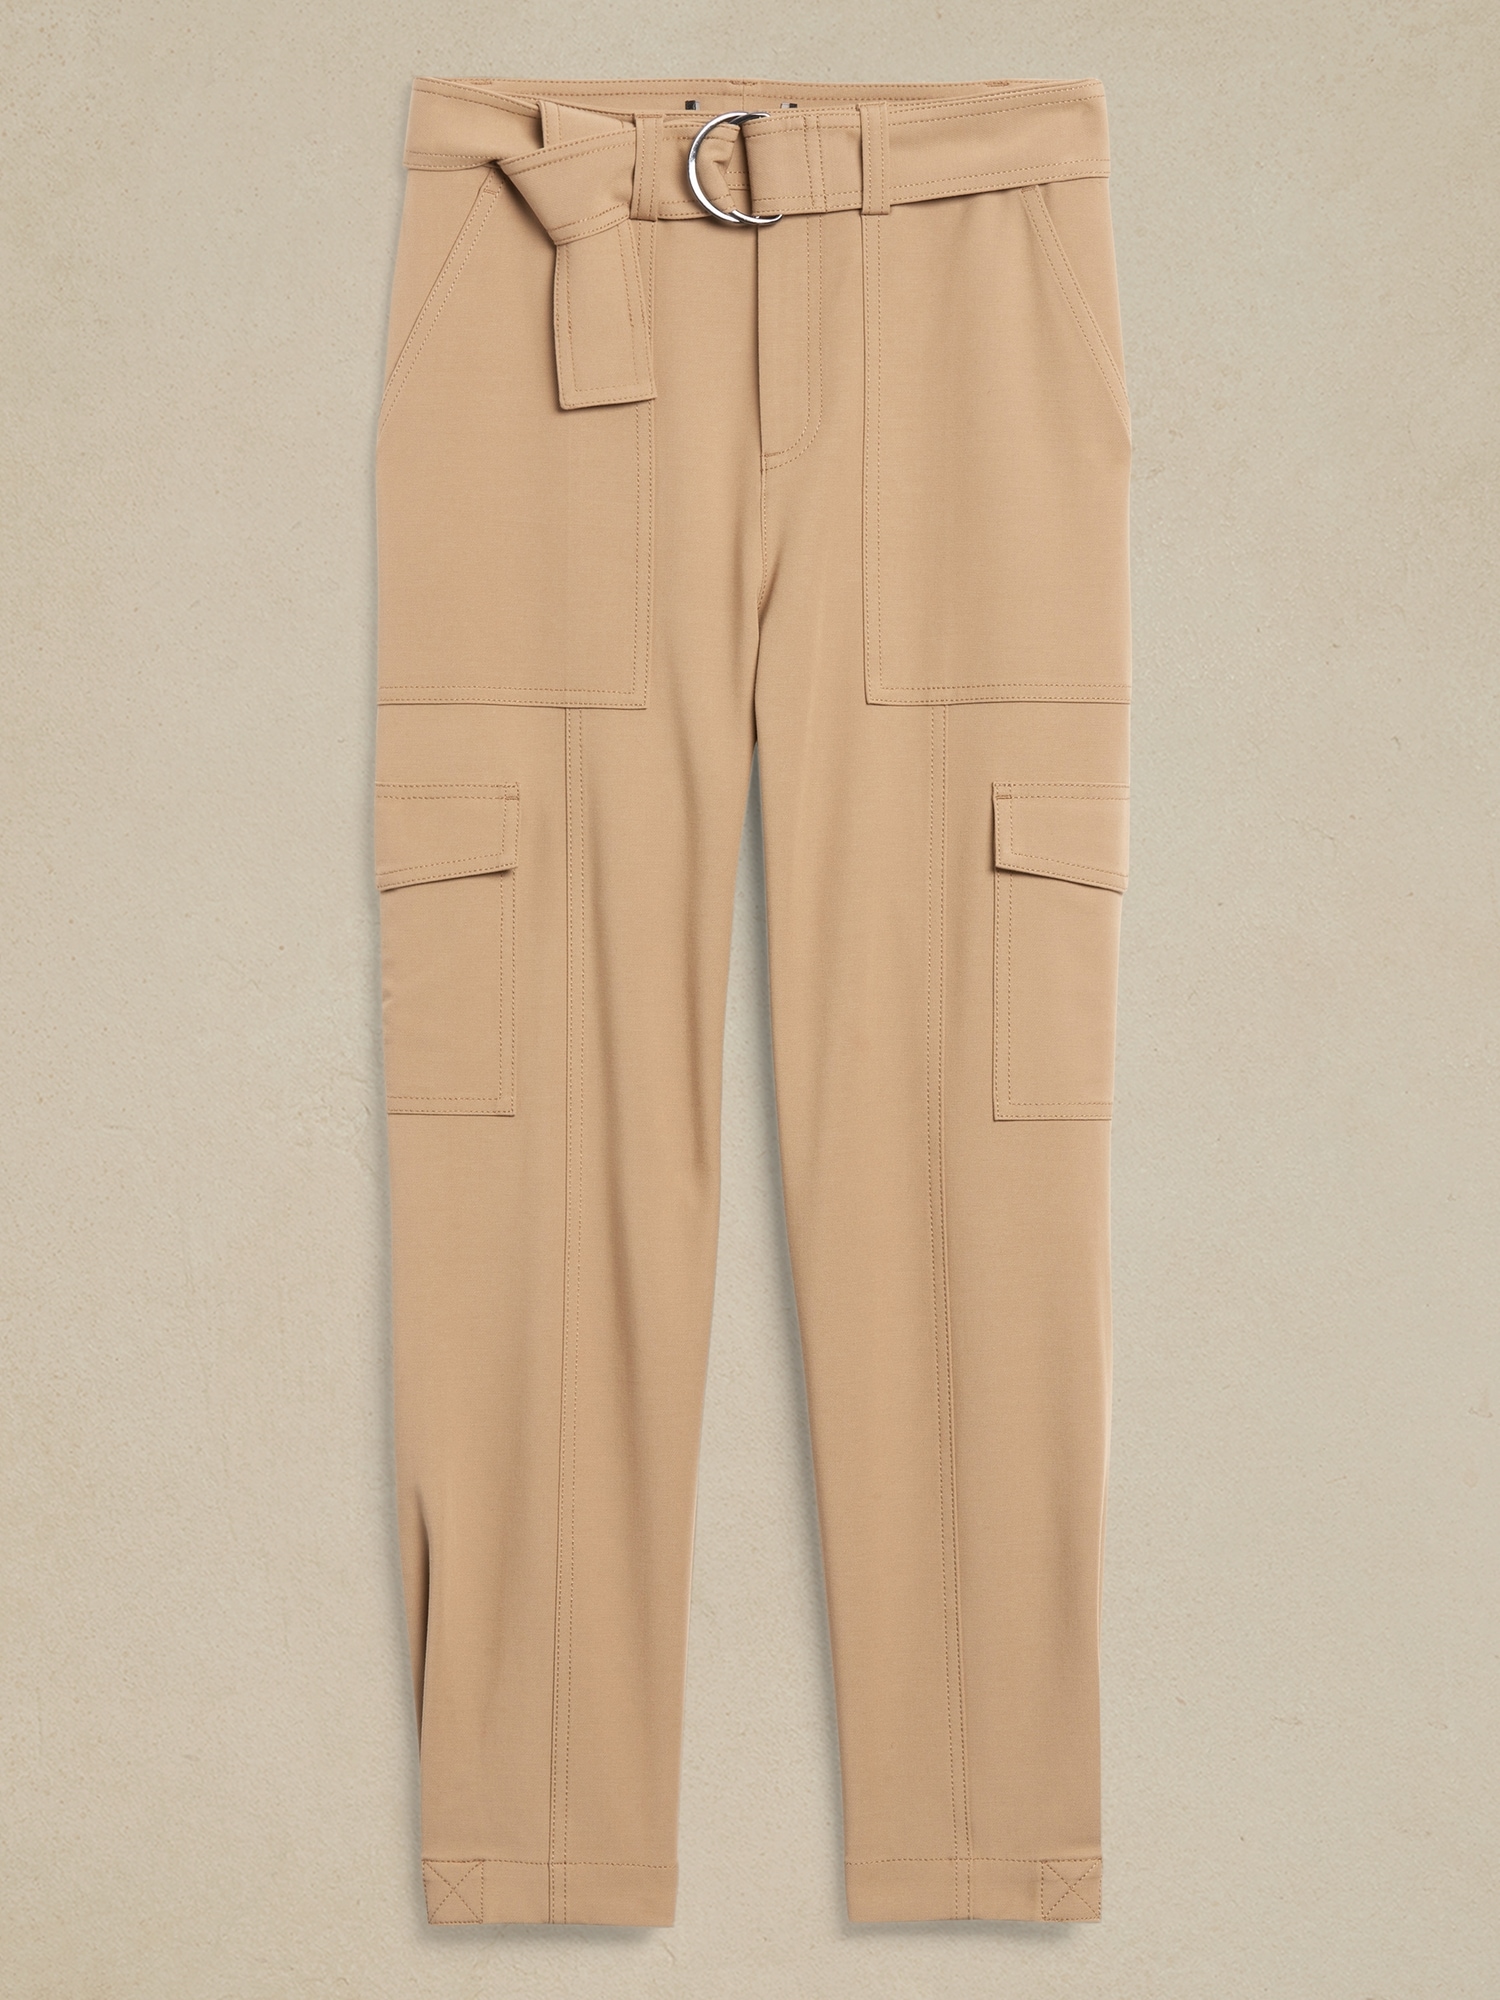 Stylish and Professional Women's Trousers